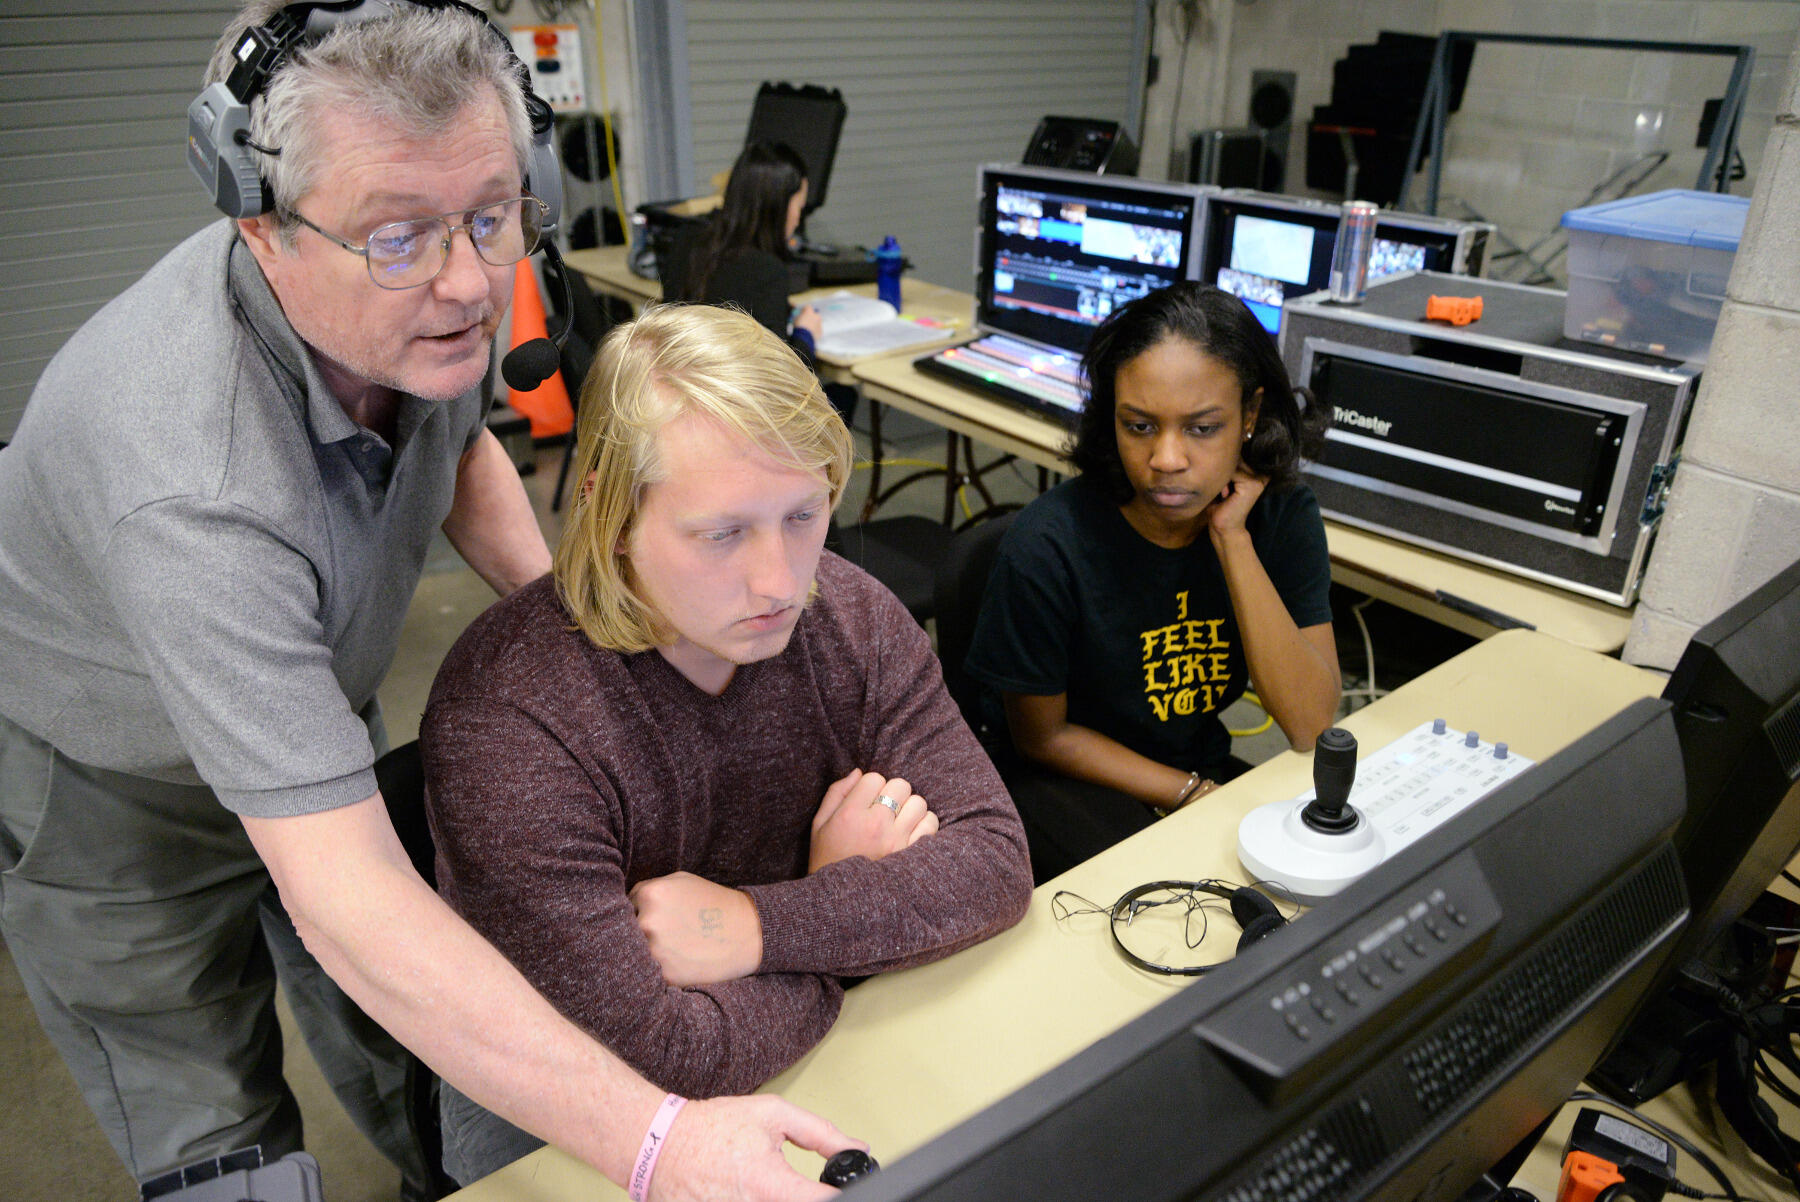 Gary Gillam, director of production services at the Richard T. Robertson School of Media and Culture in the College of Humanities and Sciences, gives direction to broadcast journalism majors Niyah Coles and Sean Boyce.